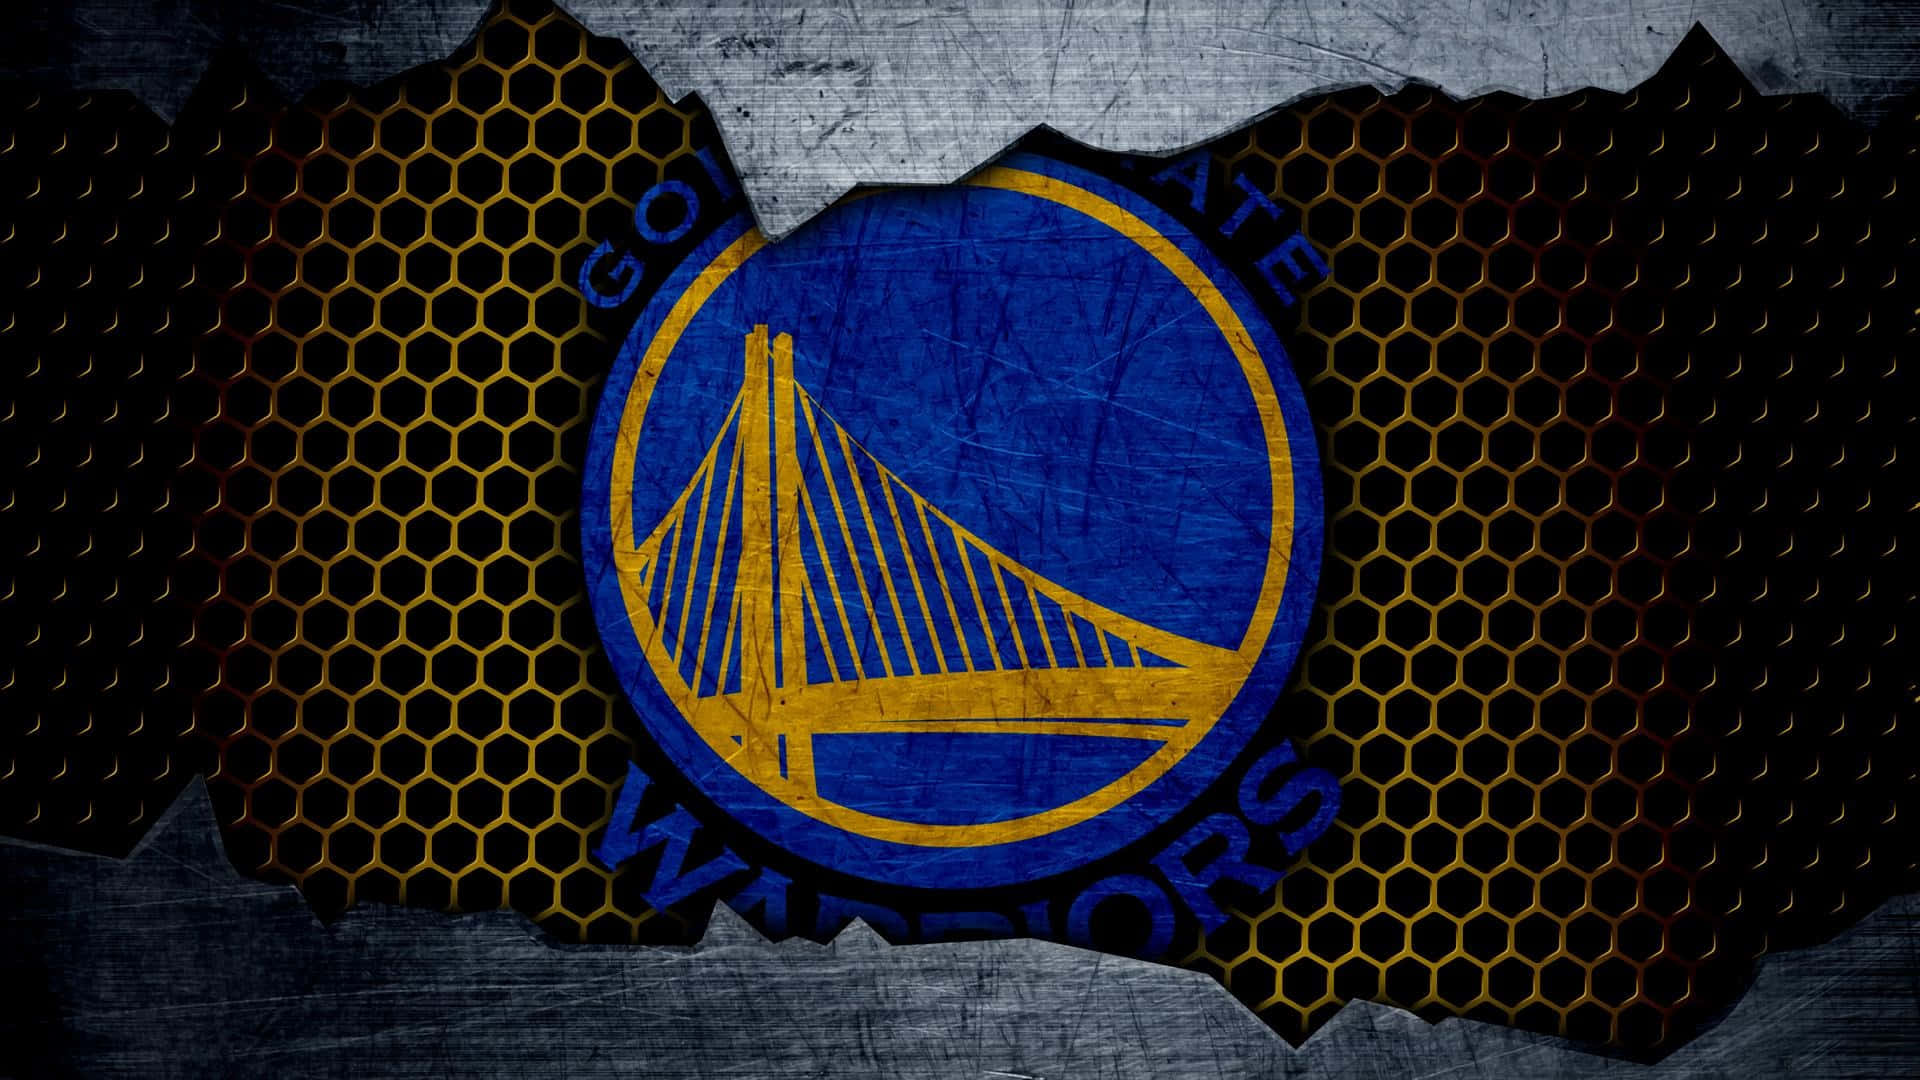 Own the court with the Golden State Warriors logo. Wallpaper